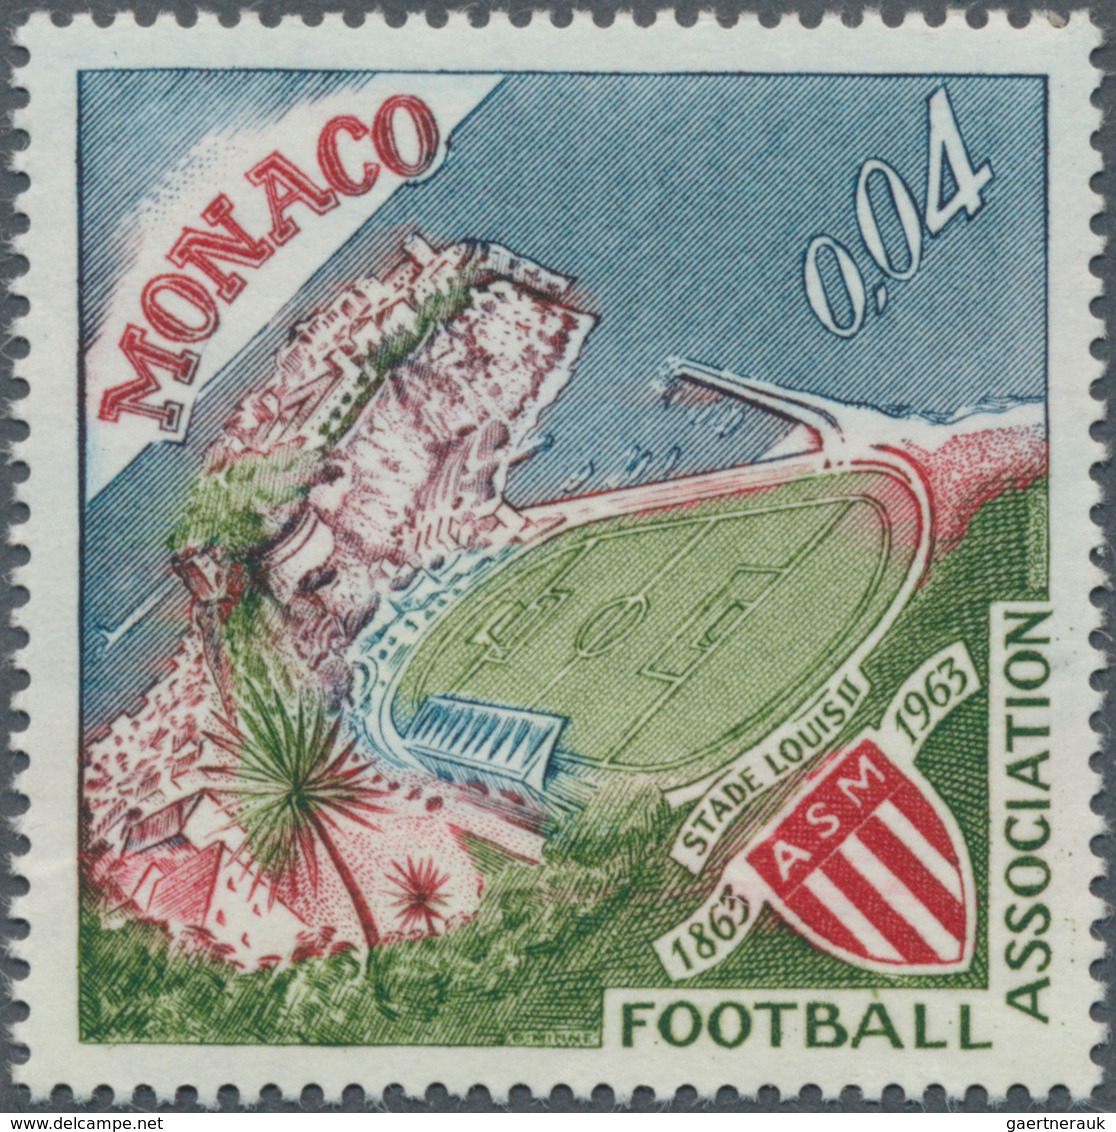 Monaco: 1963, French Champion "AS Monaco", 0.04fr. Without Surcharge, Not Issued, Unmounted Mint, Ce - Unused Stamps